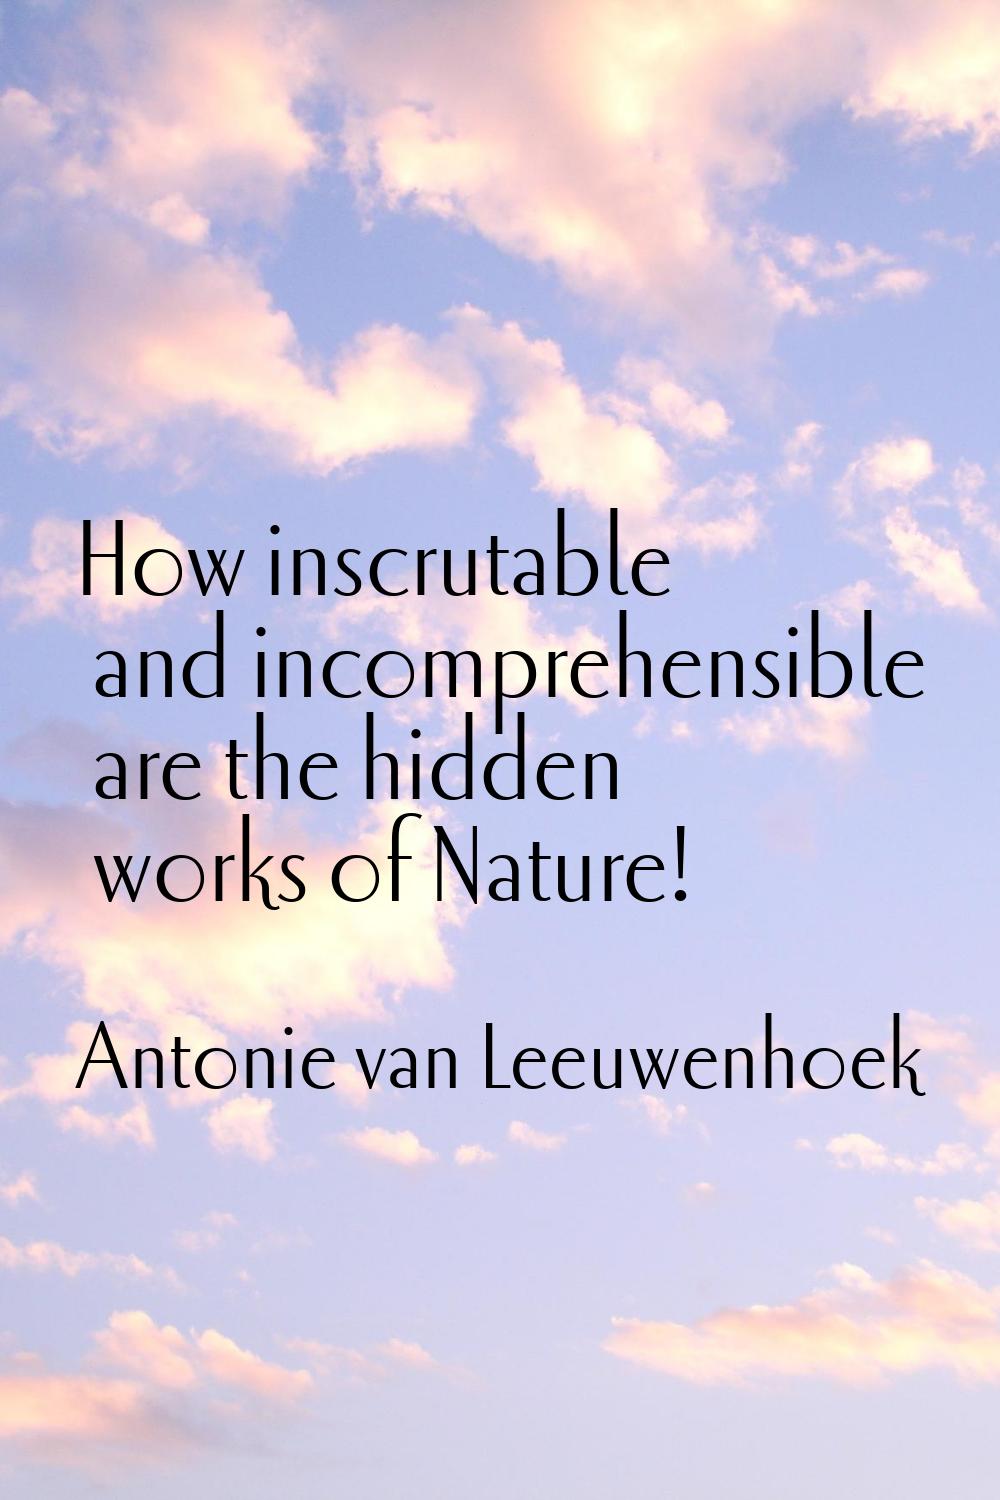 How inscrutable and incomprehensible are the hidden works of Nature!